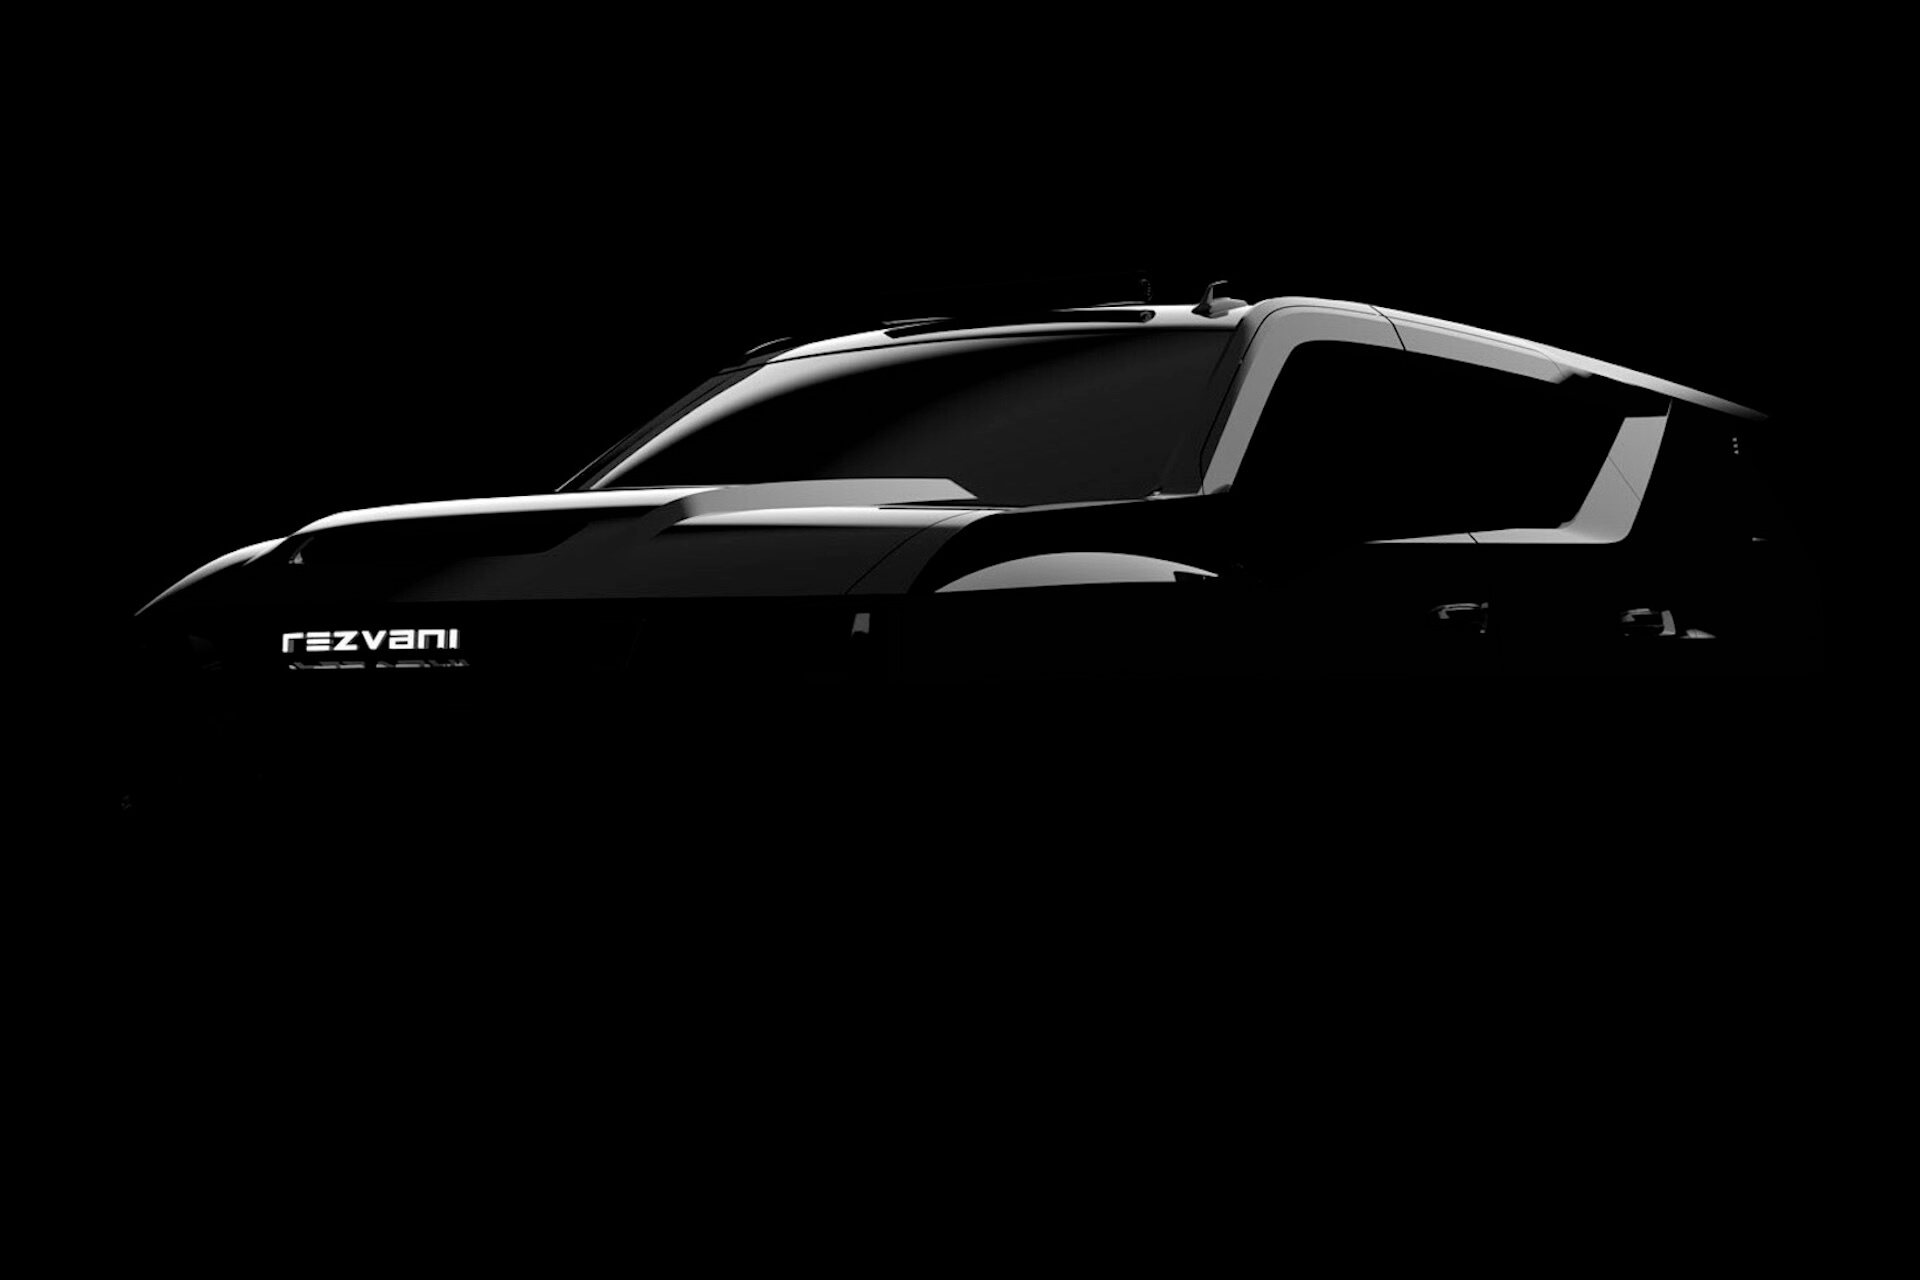 Rezvani borrowed the name for the new SUV from Aurus